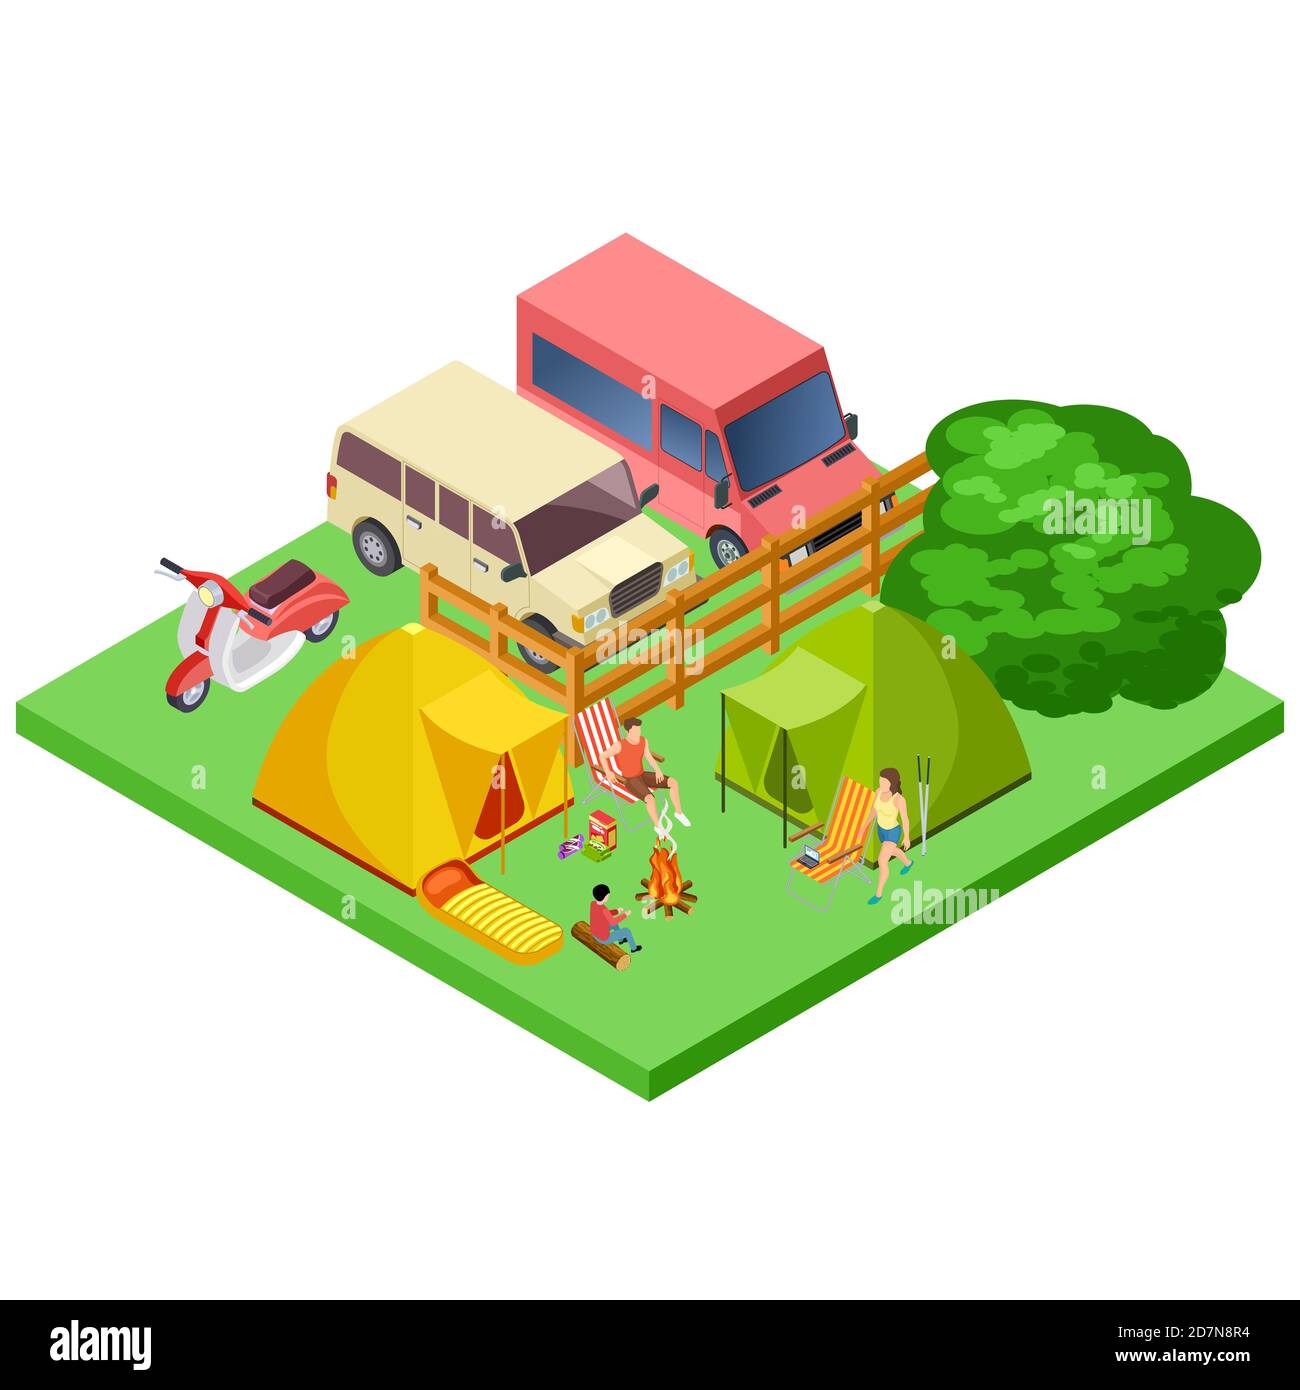 Family resting in nature, eco tourism, camping isometric vector location. Illustration of family outdoor, 3d environment grass and camp Stock Vector